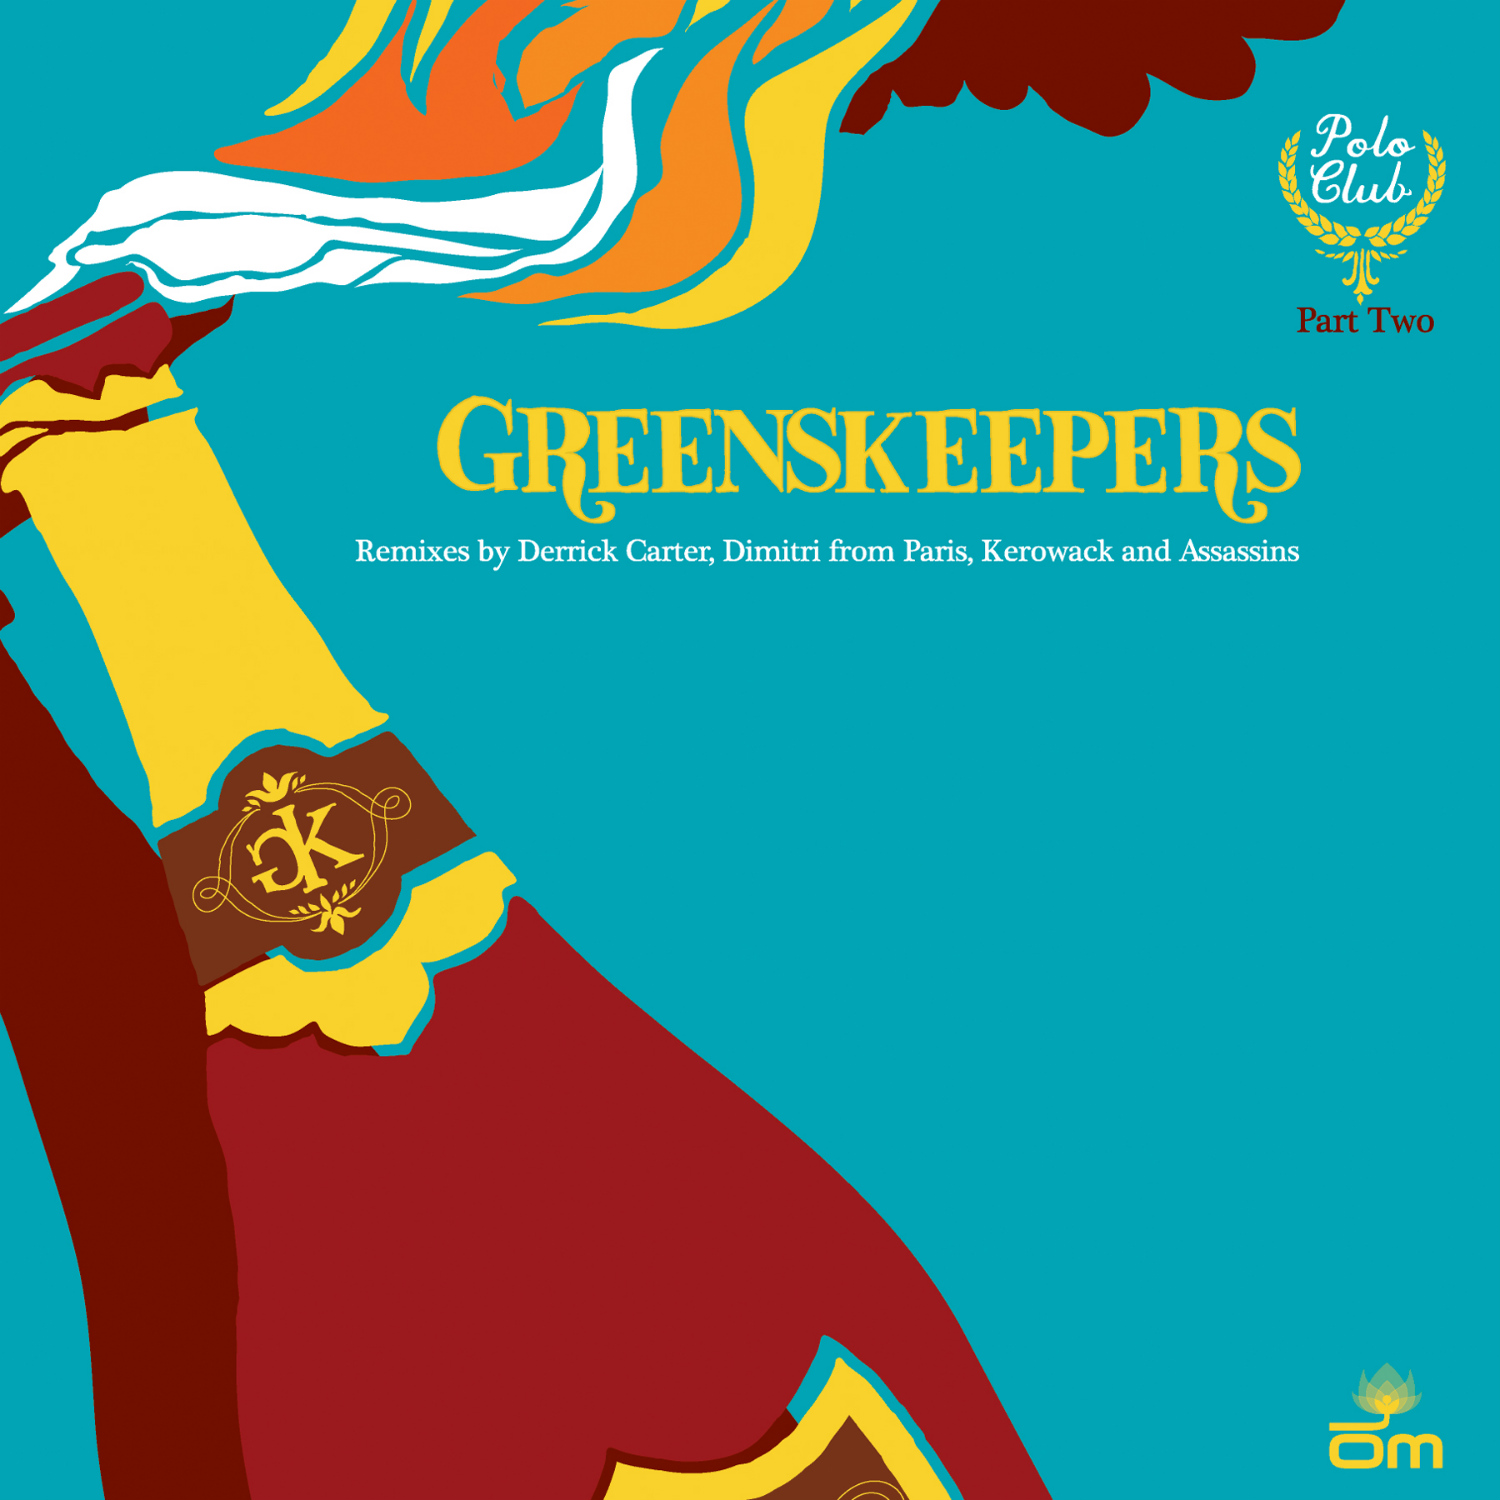 Greenskeepers - Polo Club Pt. 2